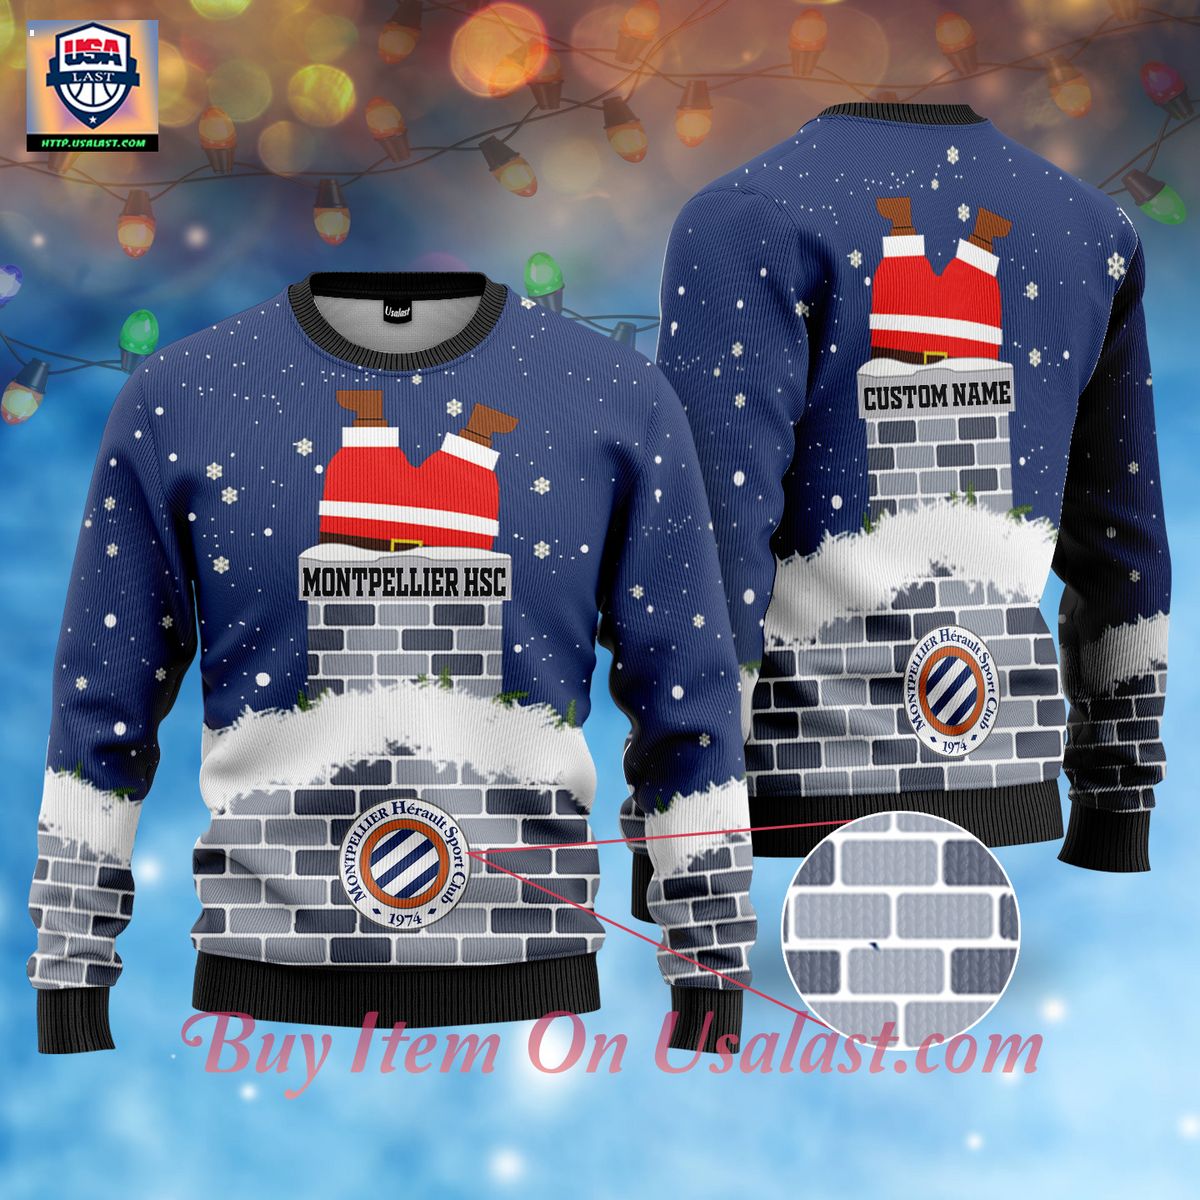 Montpellier HSC Santa Claus Custom Name Ugly Christmas Sweater – Usalast